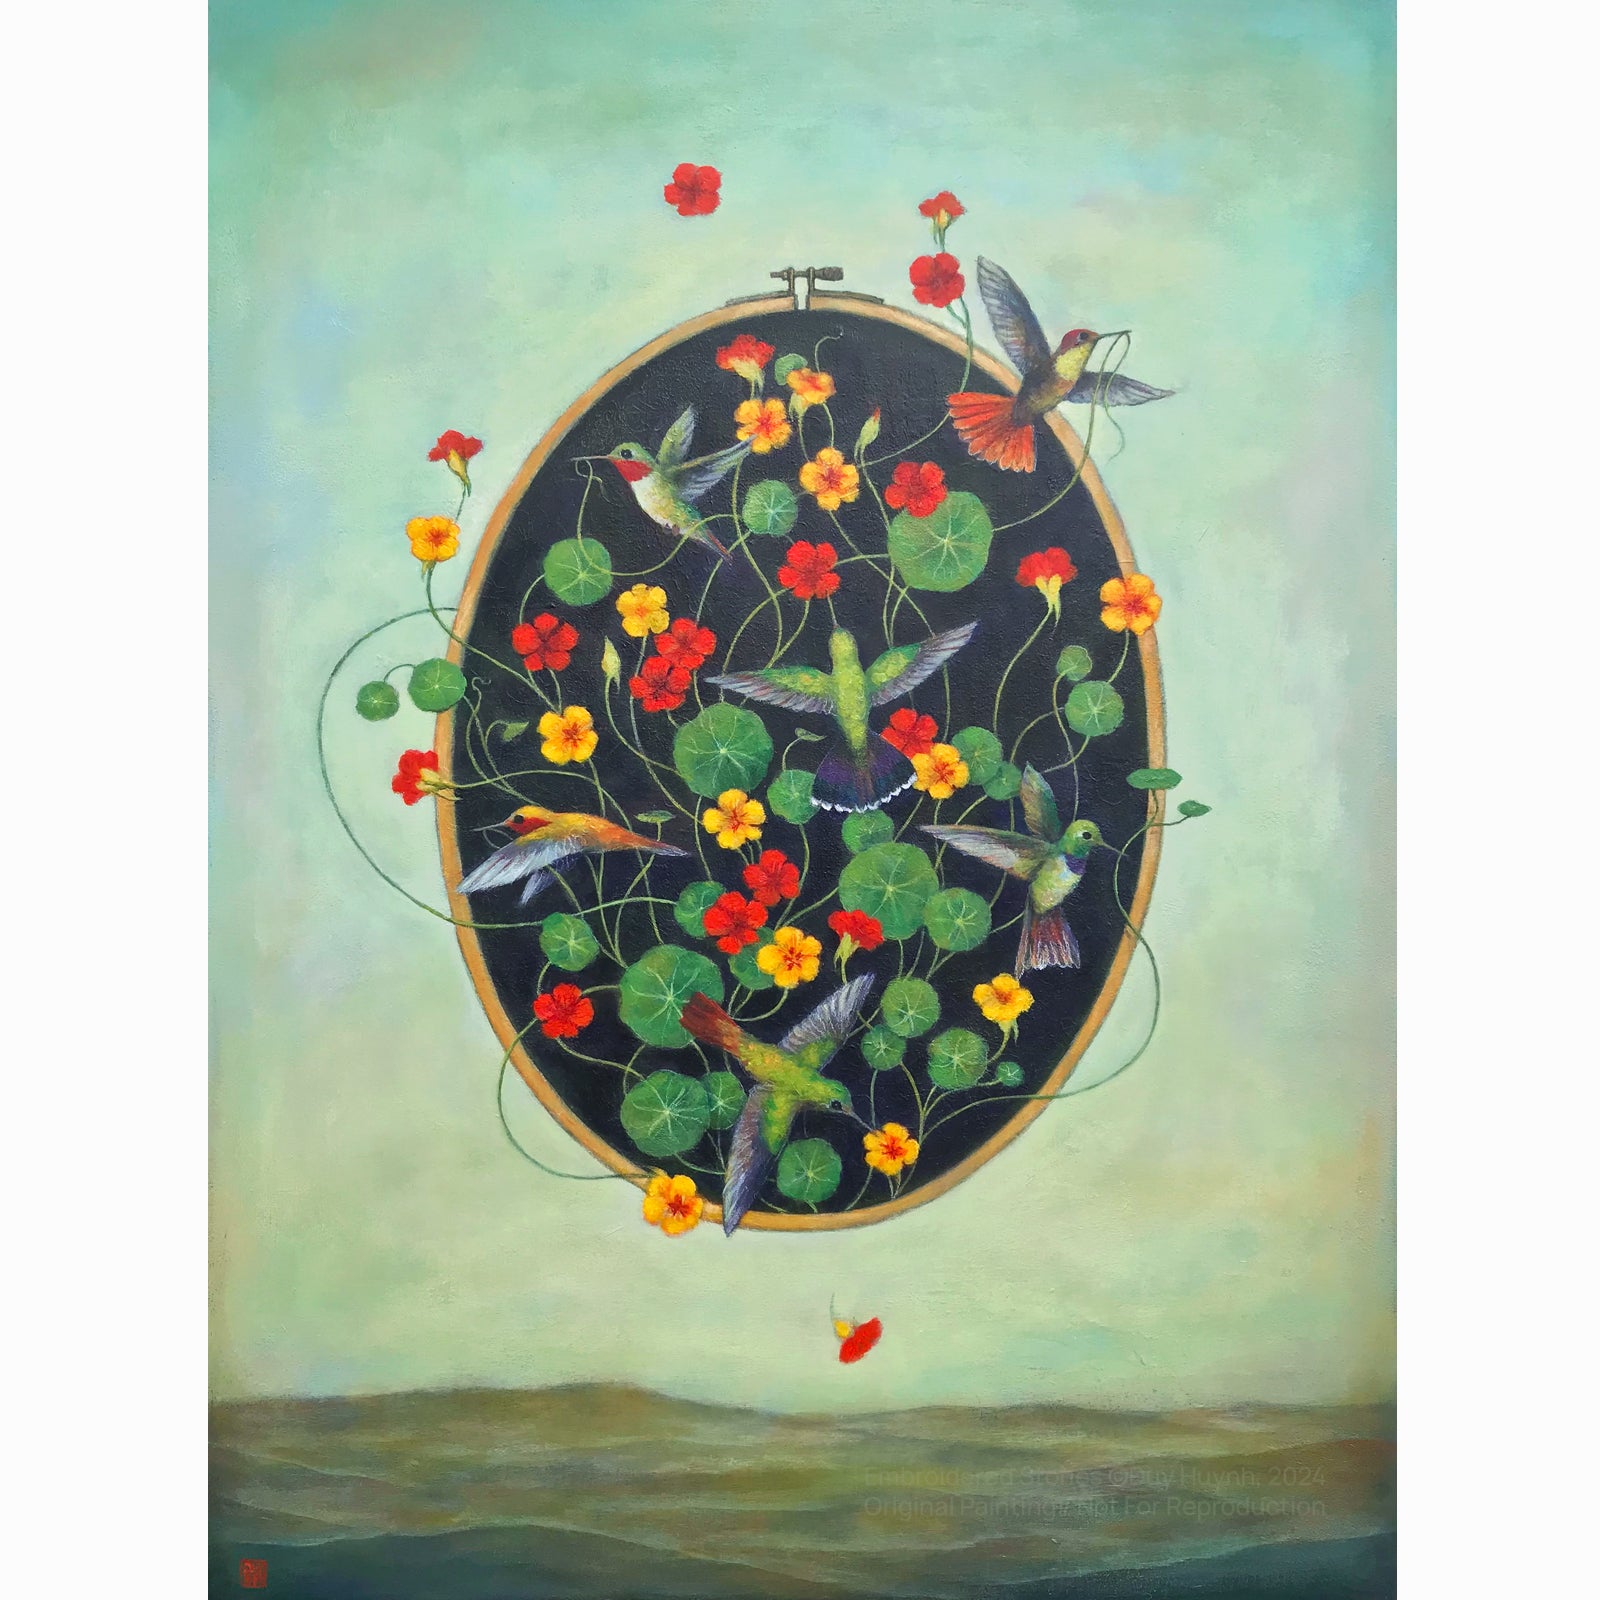 Artist Duy Huynh 's painting called "Embroidered Stories". An oval embroidery hoop floats in the sky over an open landscape. It is filled with nasturtium flowers with hummingbirds weaving threads throughout. Available at Lark & Key, Charlotte NC.